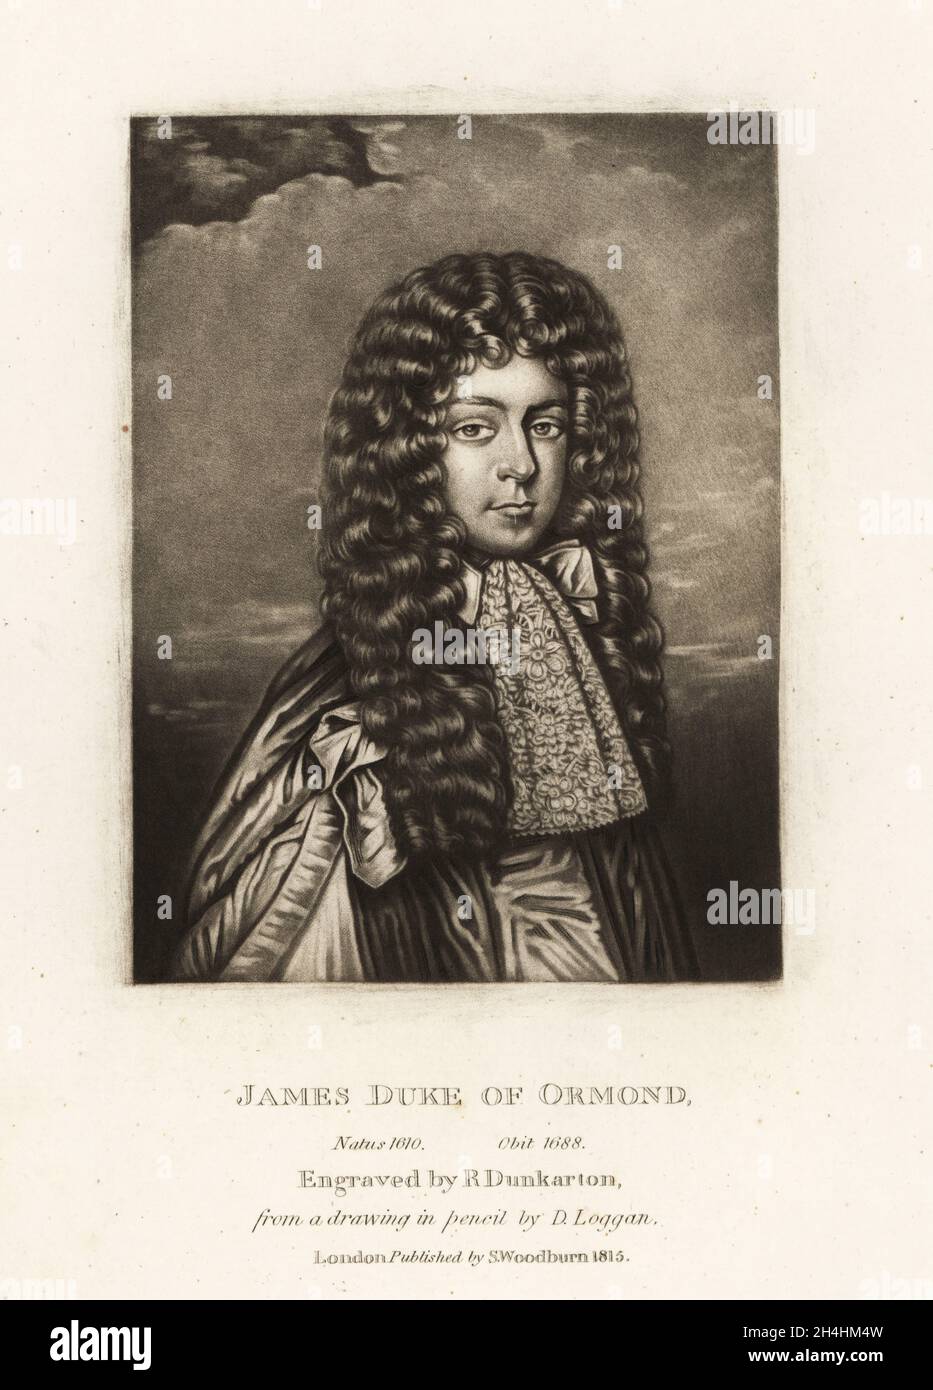 Lieutenant-General James FitzThomas Butler, 1st Duke of Ormonde, 1610–1688. Irish statesman and Royalist soldier, known as Earl of Ormond and Marquess of Ormond. Mezzotint engraving by Robert Dunkarton after a pencil drawing by David Loggan from Richard Earlom and Charles Turner's Portraits of Characters Illustrious in British History Engraved in Mezzotinto, published by S. Woodburn, London, 1815. Stock Photo